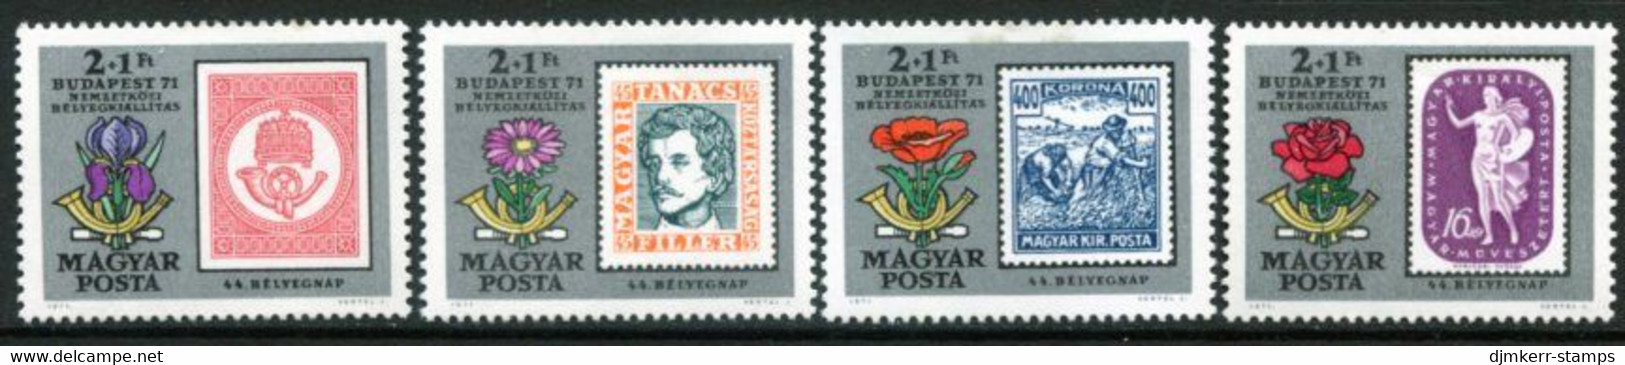 HUNGARY 1971 BUDAPEST '71 Exhibition MNH / **.  Michel 2684-87 - Unused Stamps